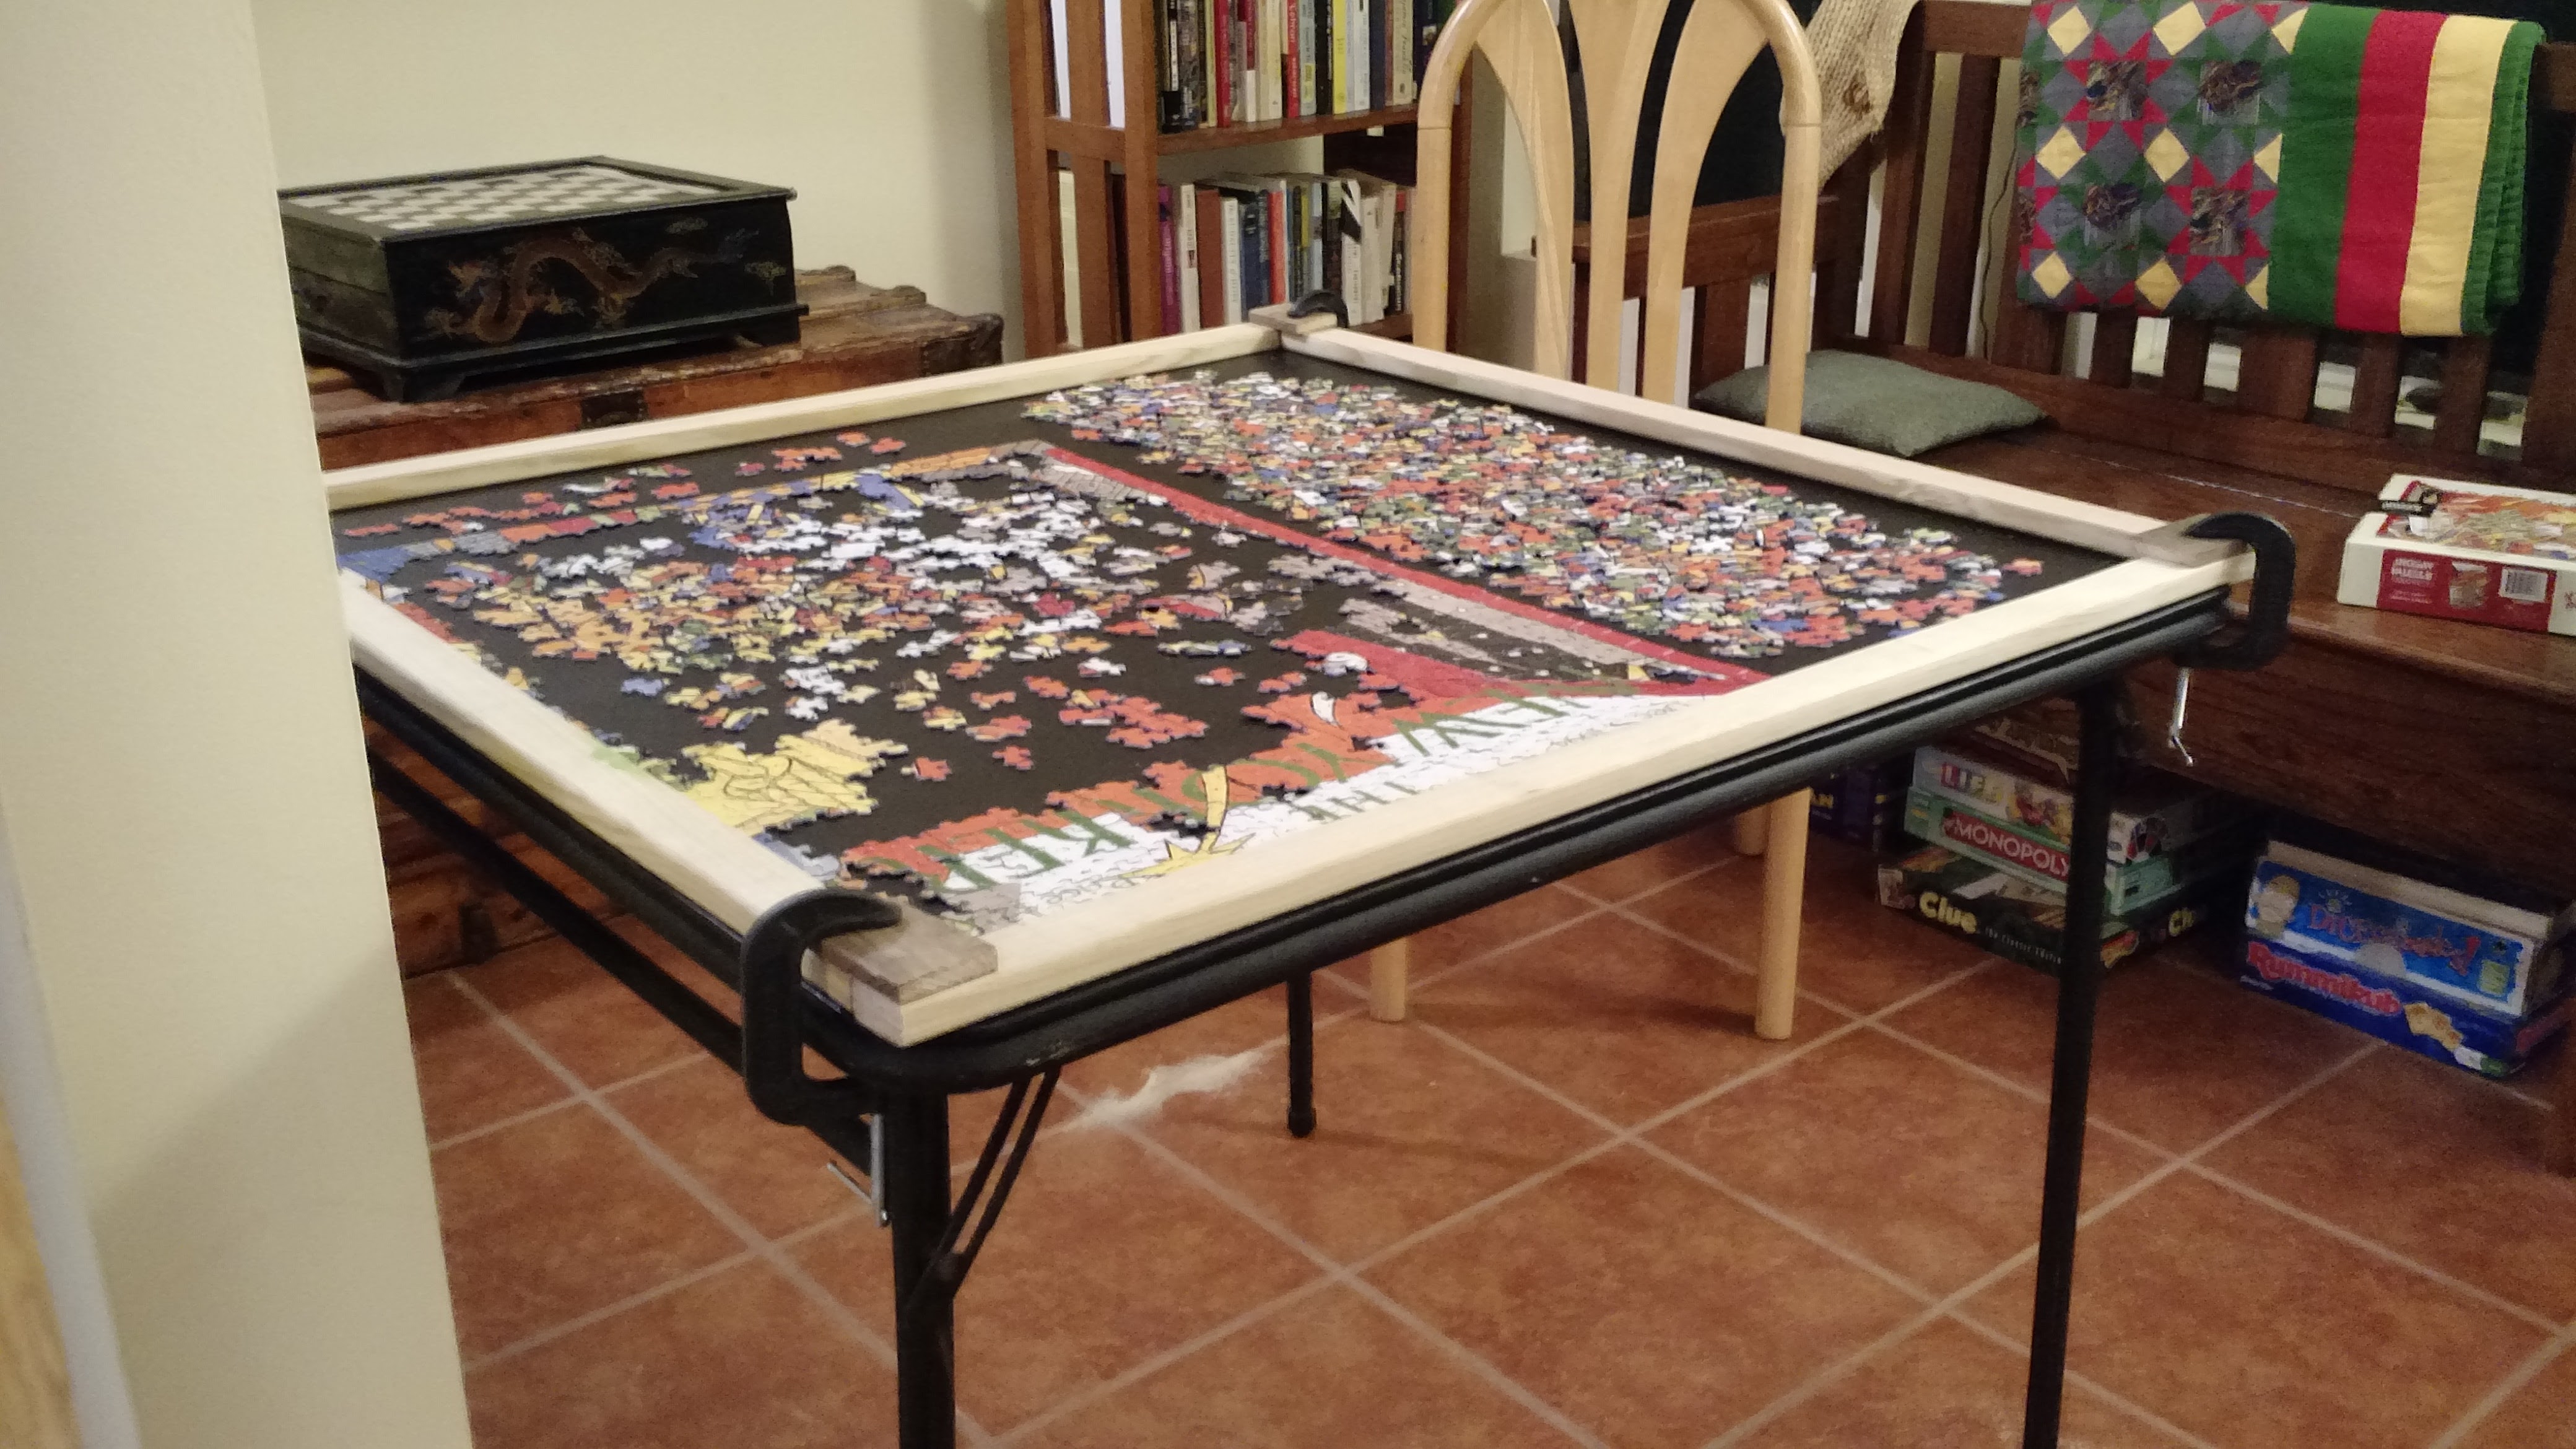 Finished puzzle table